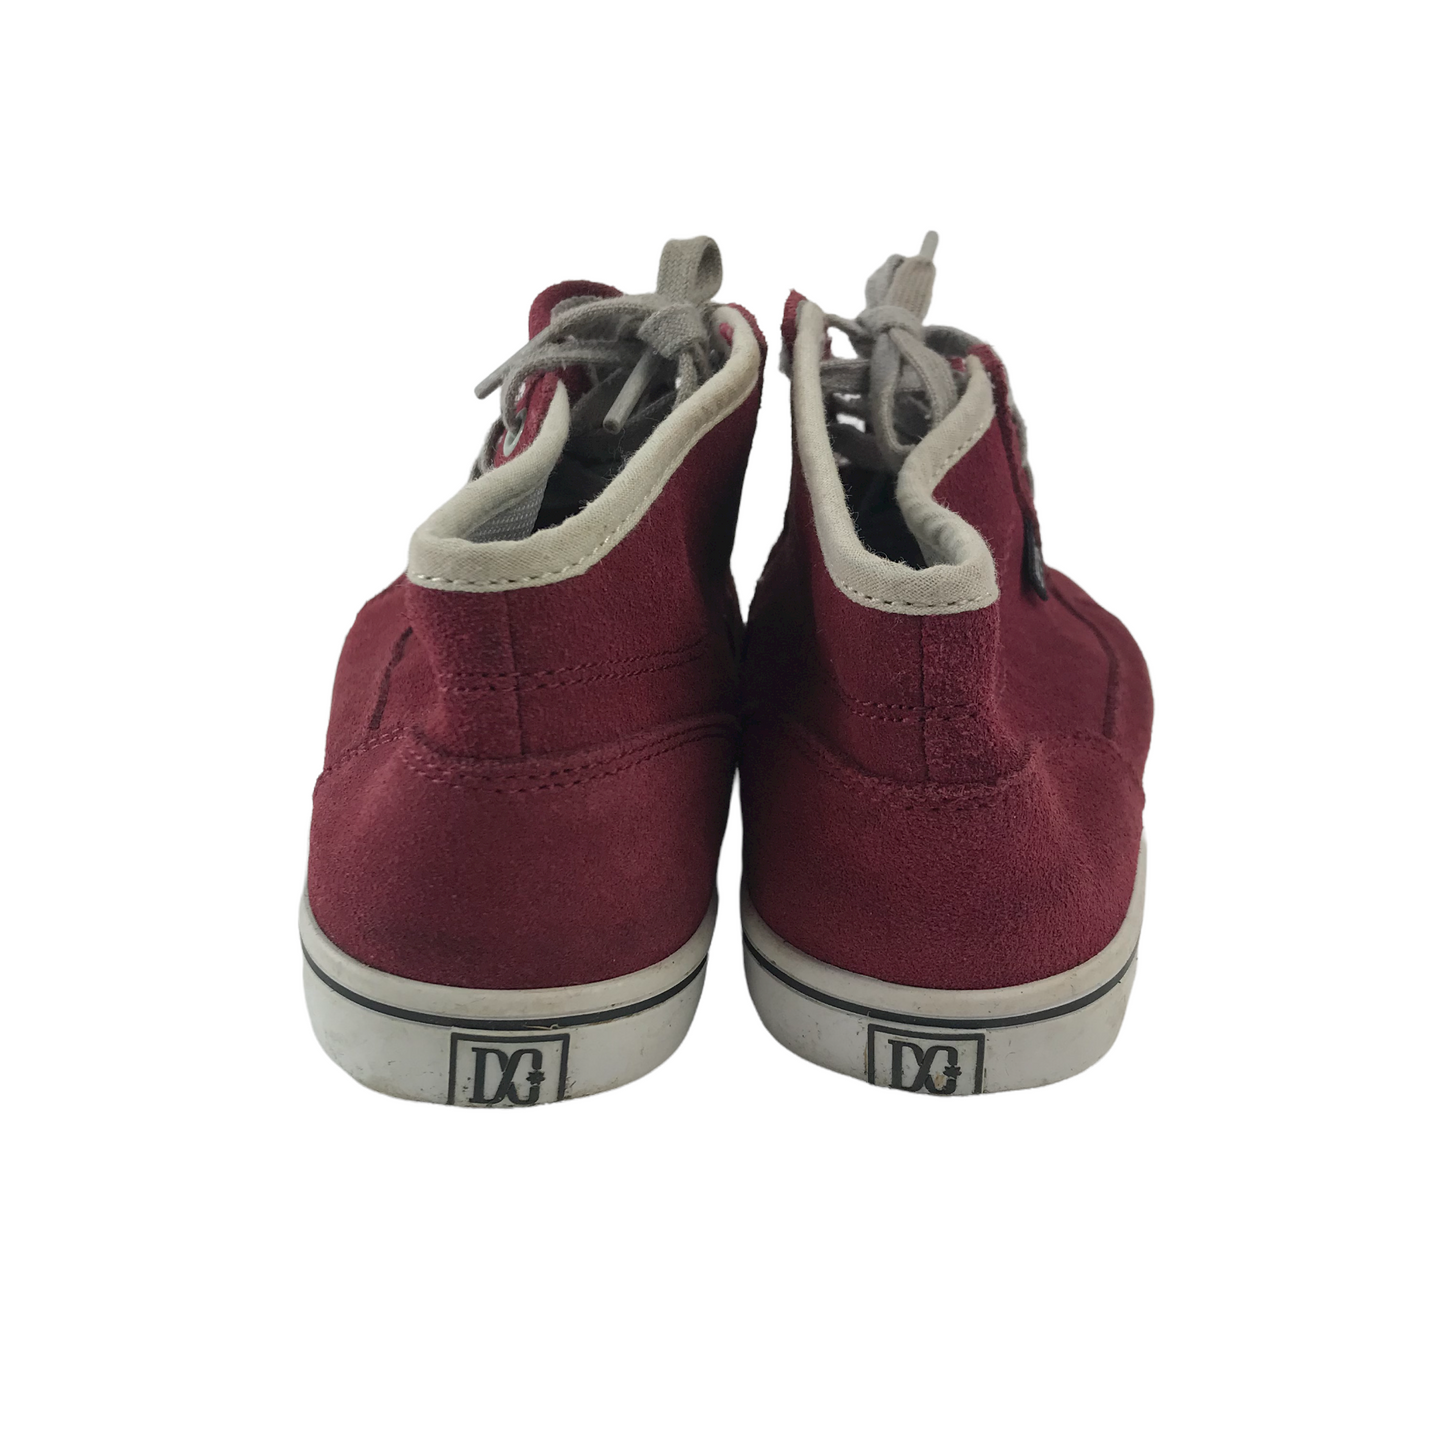 DC Burgundy Leather High Tops Trainers Shoe Size 3